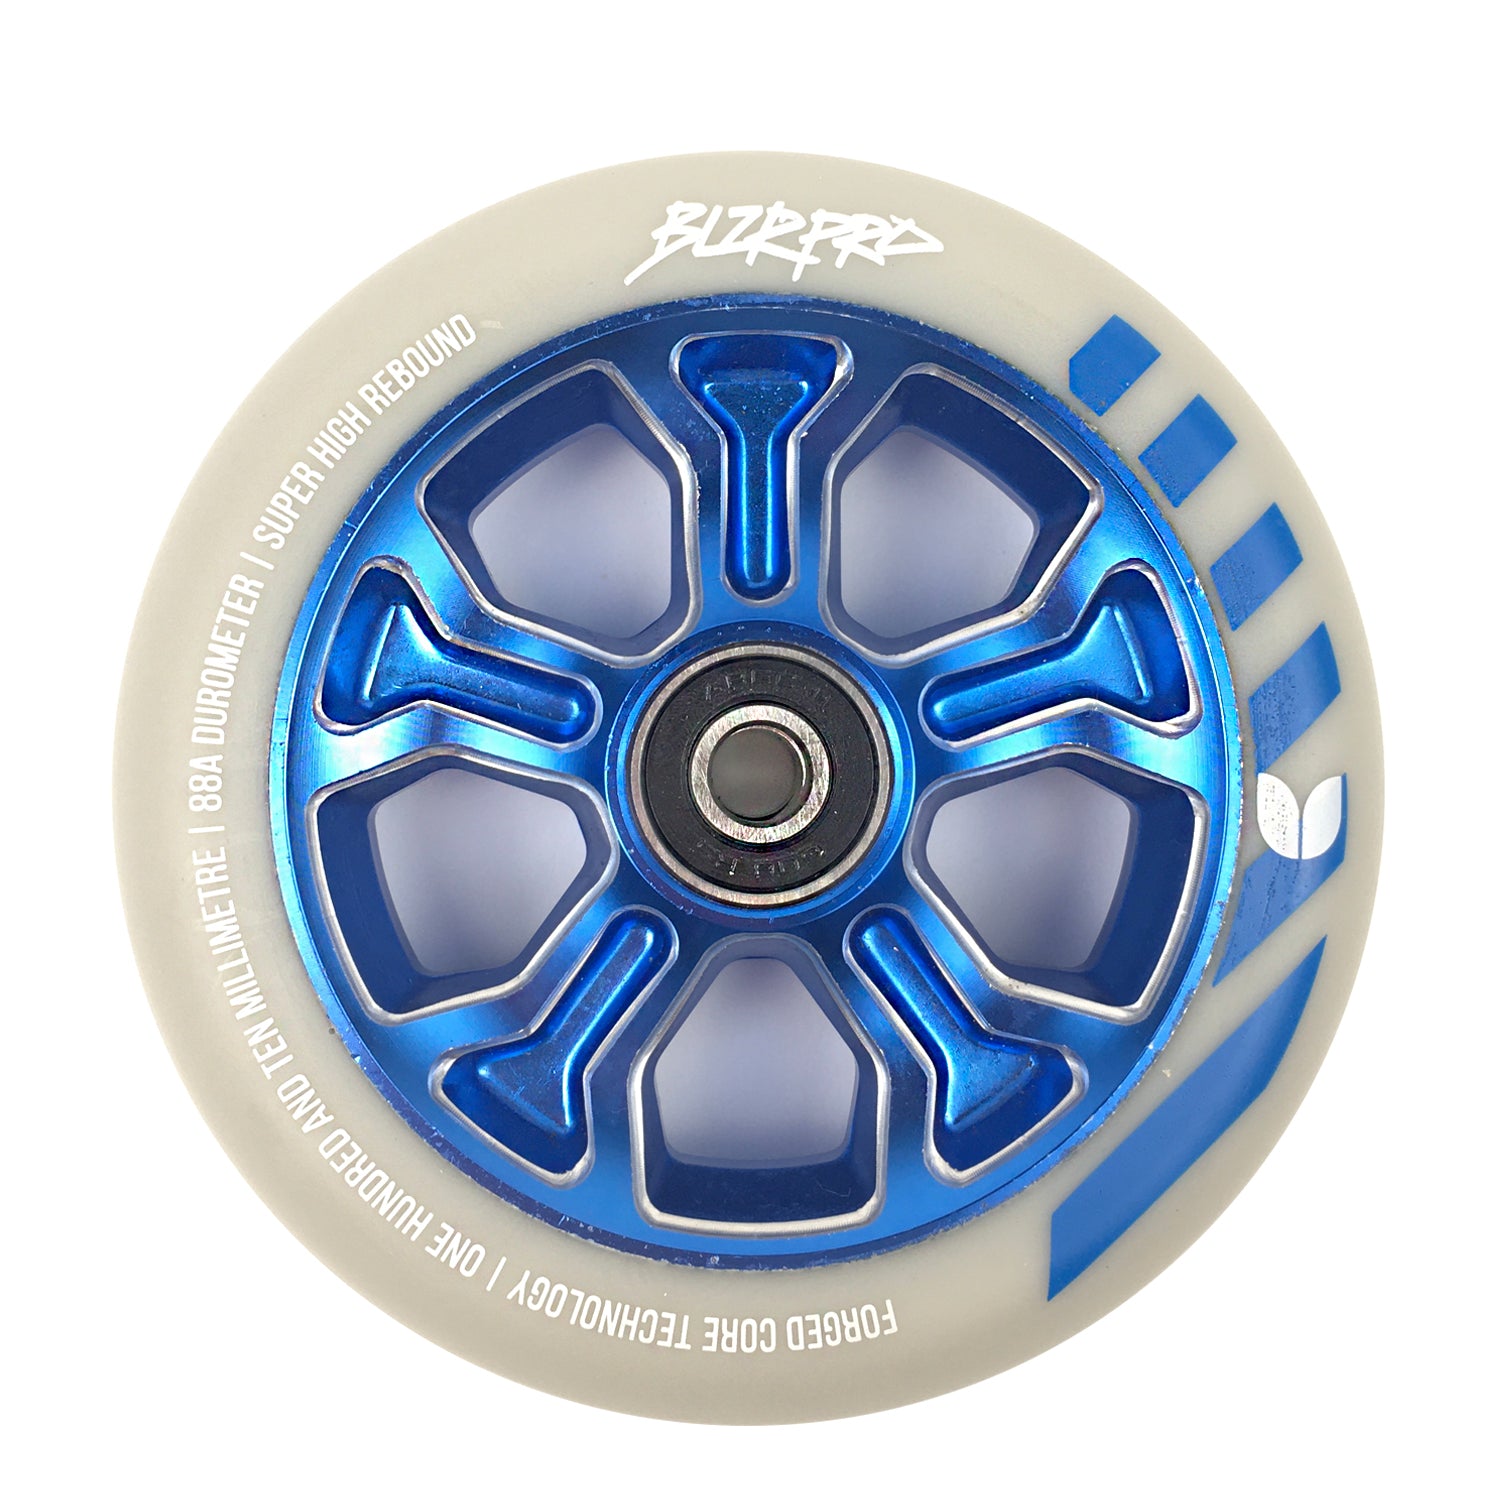 Blazer Pro Scooter Wheel Rebellion Forged 110mm Grey / Blue - Prime Delux Store